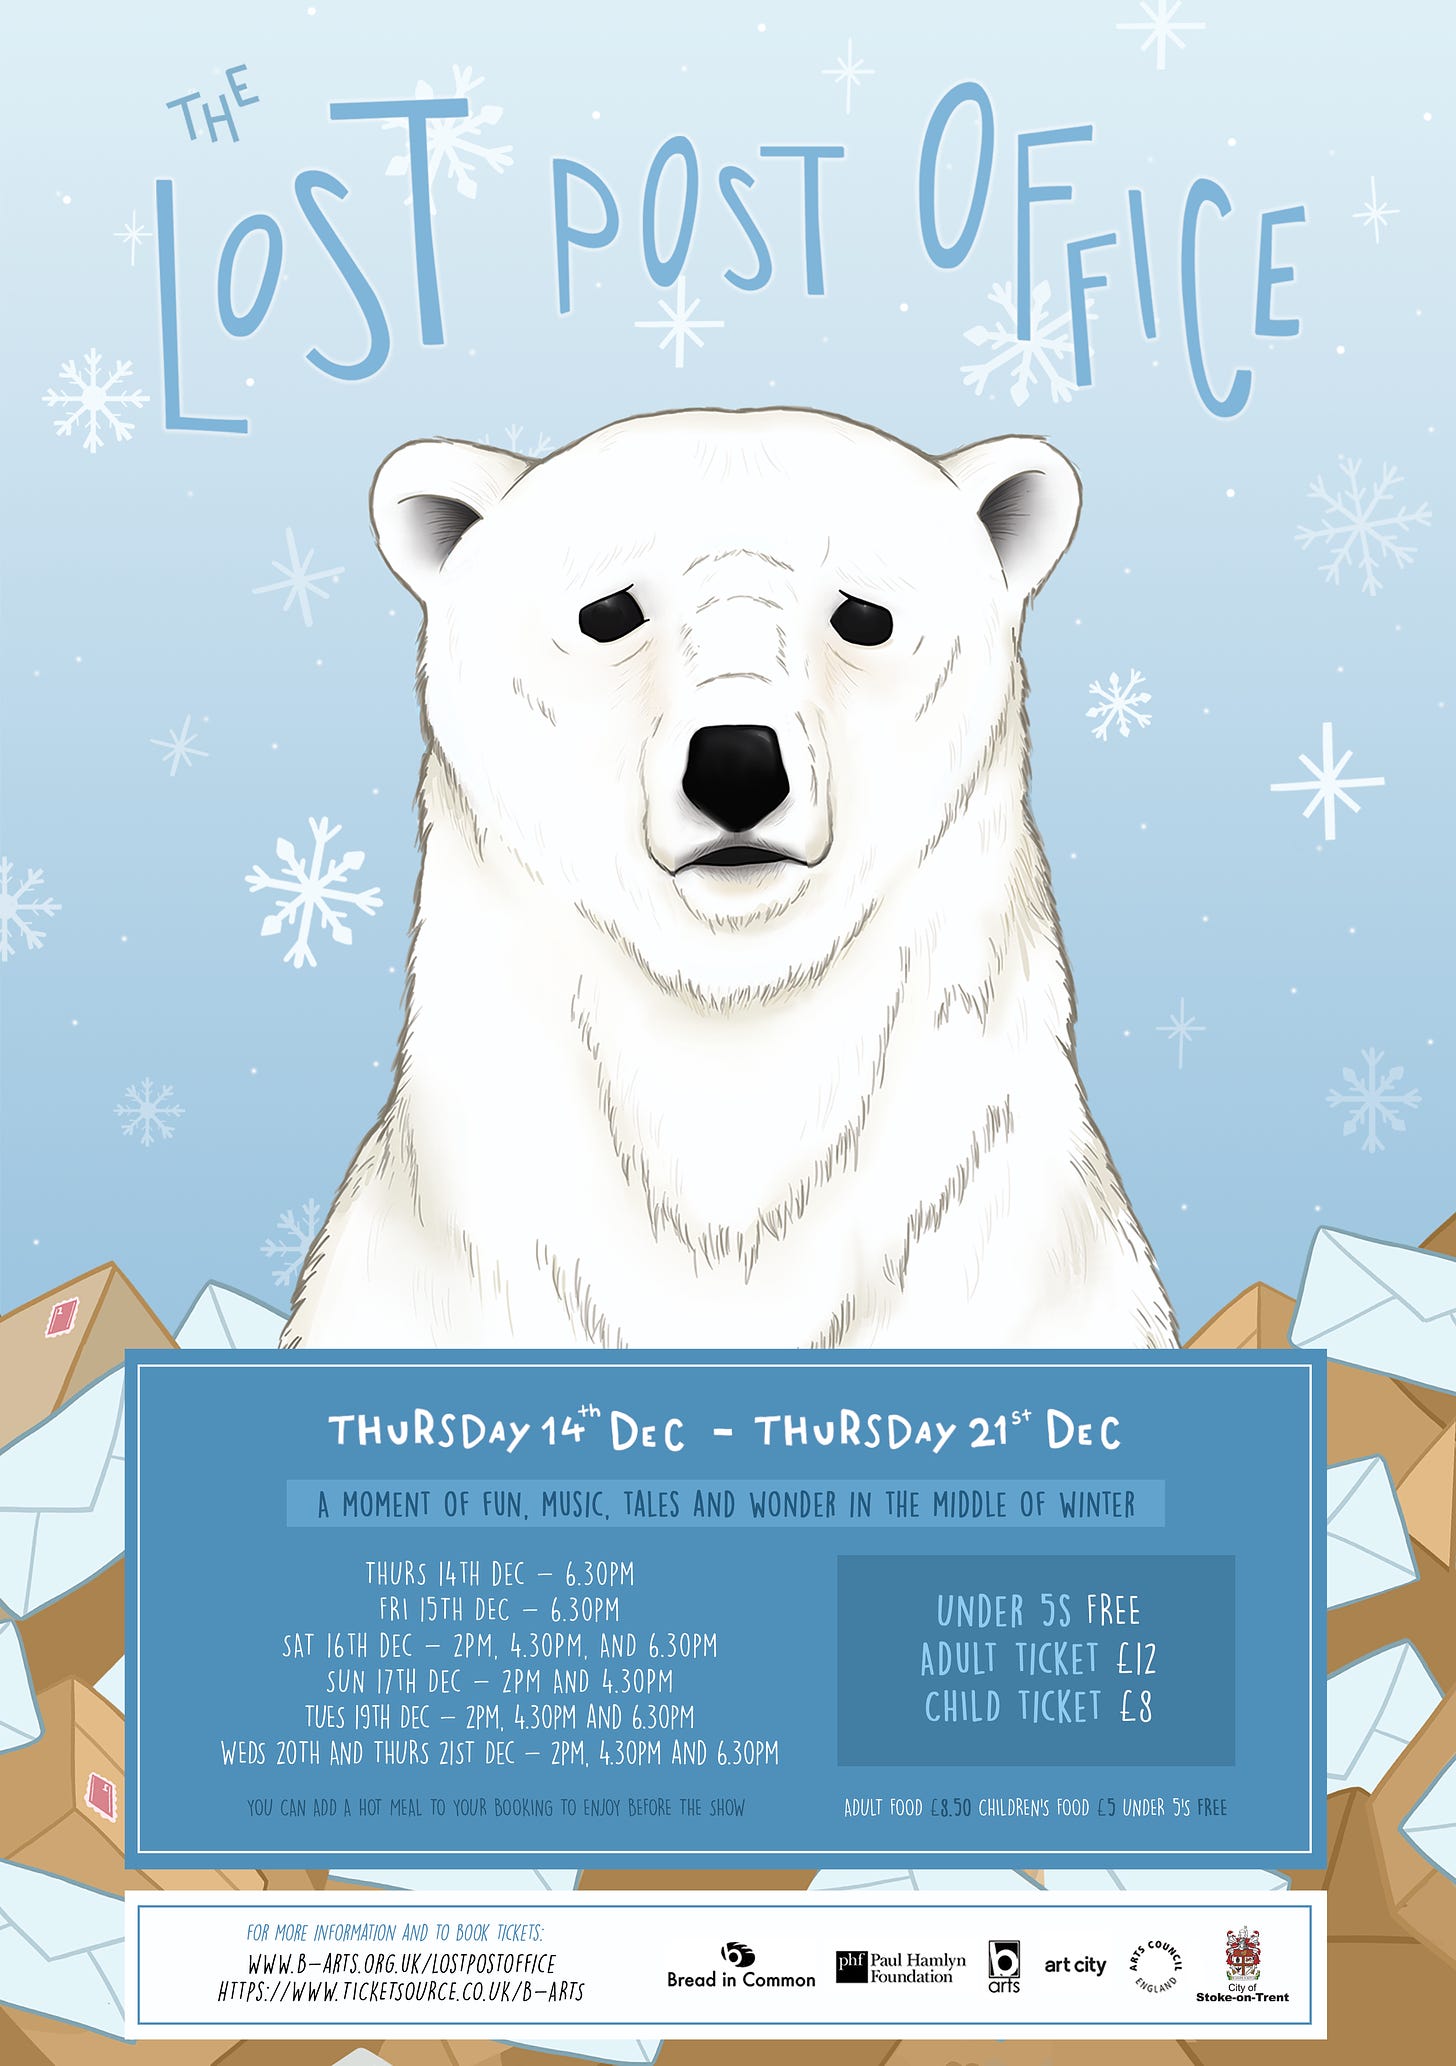 The Lost Post Office show poster featuring a polar bear